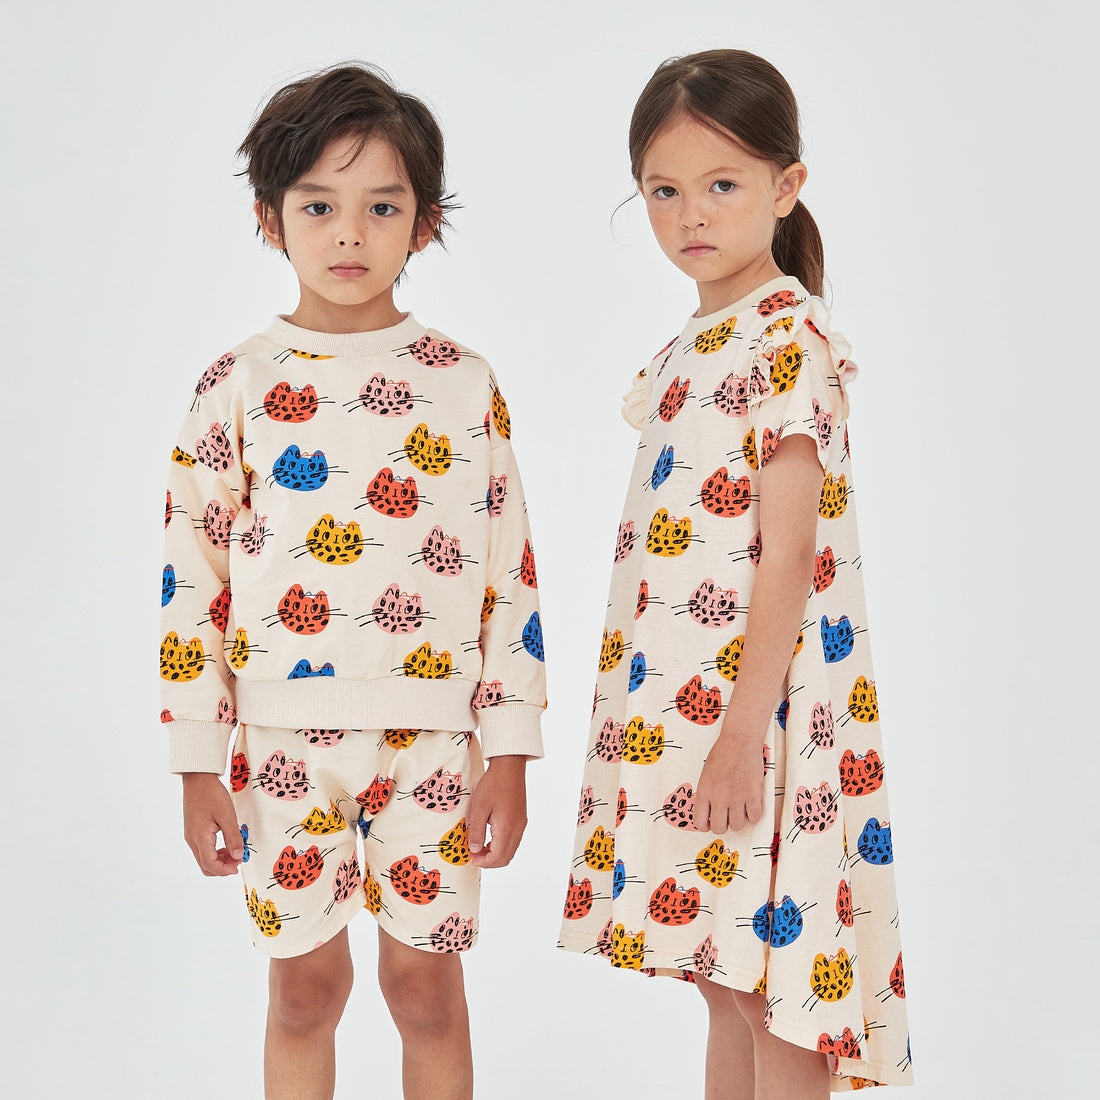 Multi Cat sweatshirt with cream background and multi colors cats. The sweatshirt has rib round neck and cuffs